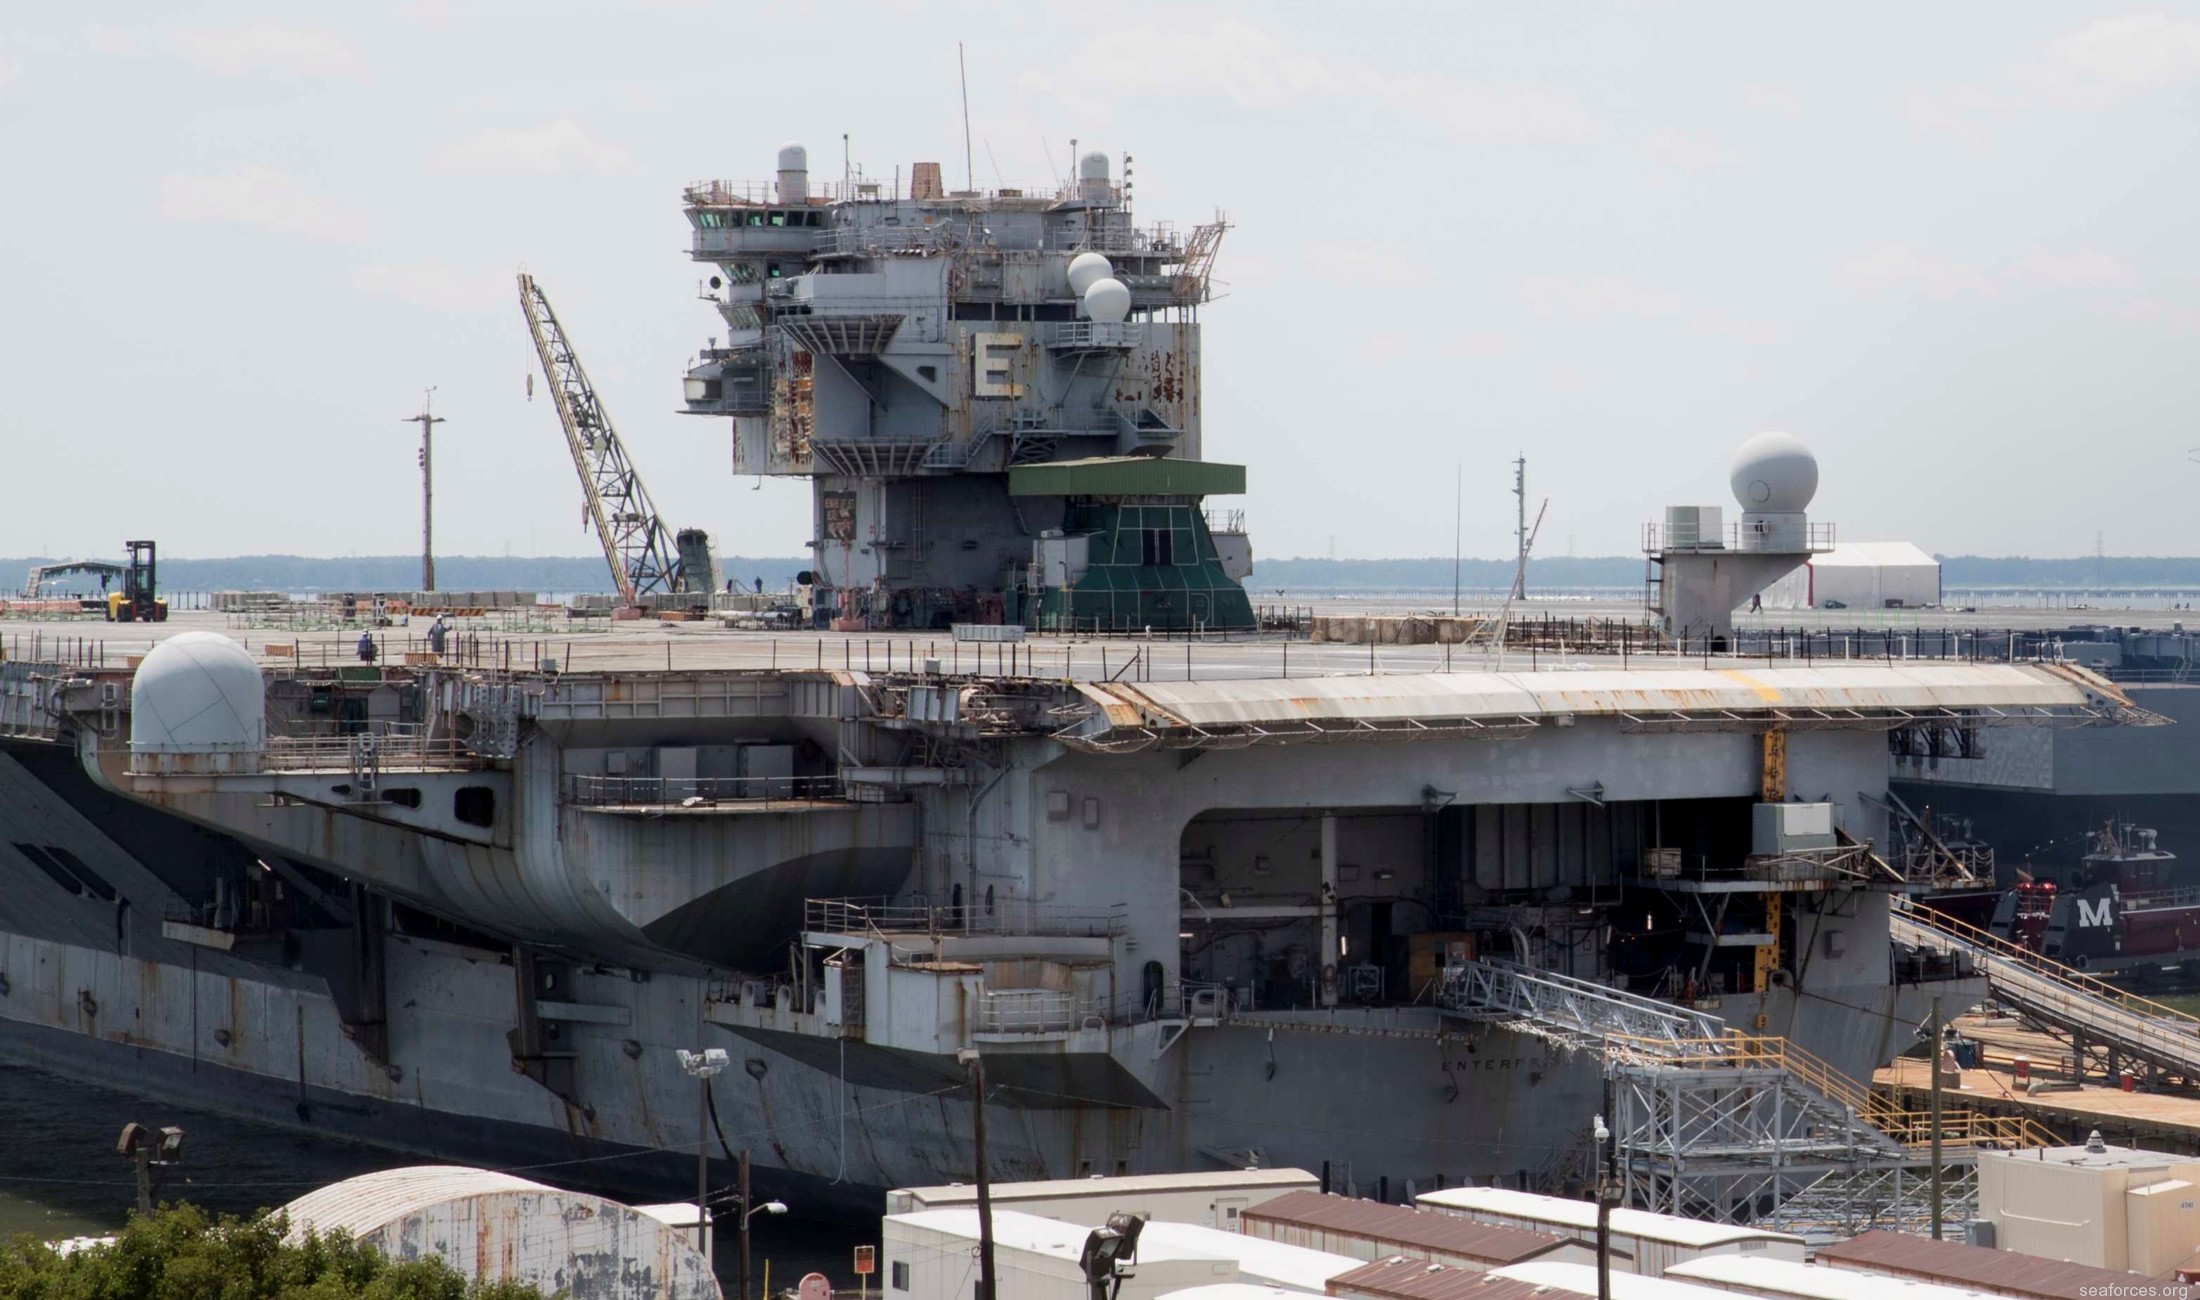 Sept. 24, 1960: First Nuclear Carrier, USS Enterprise, Launched